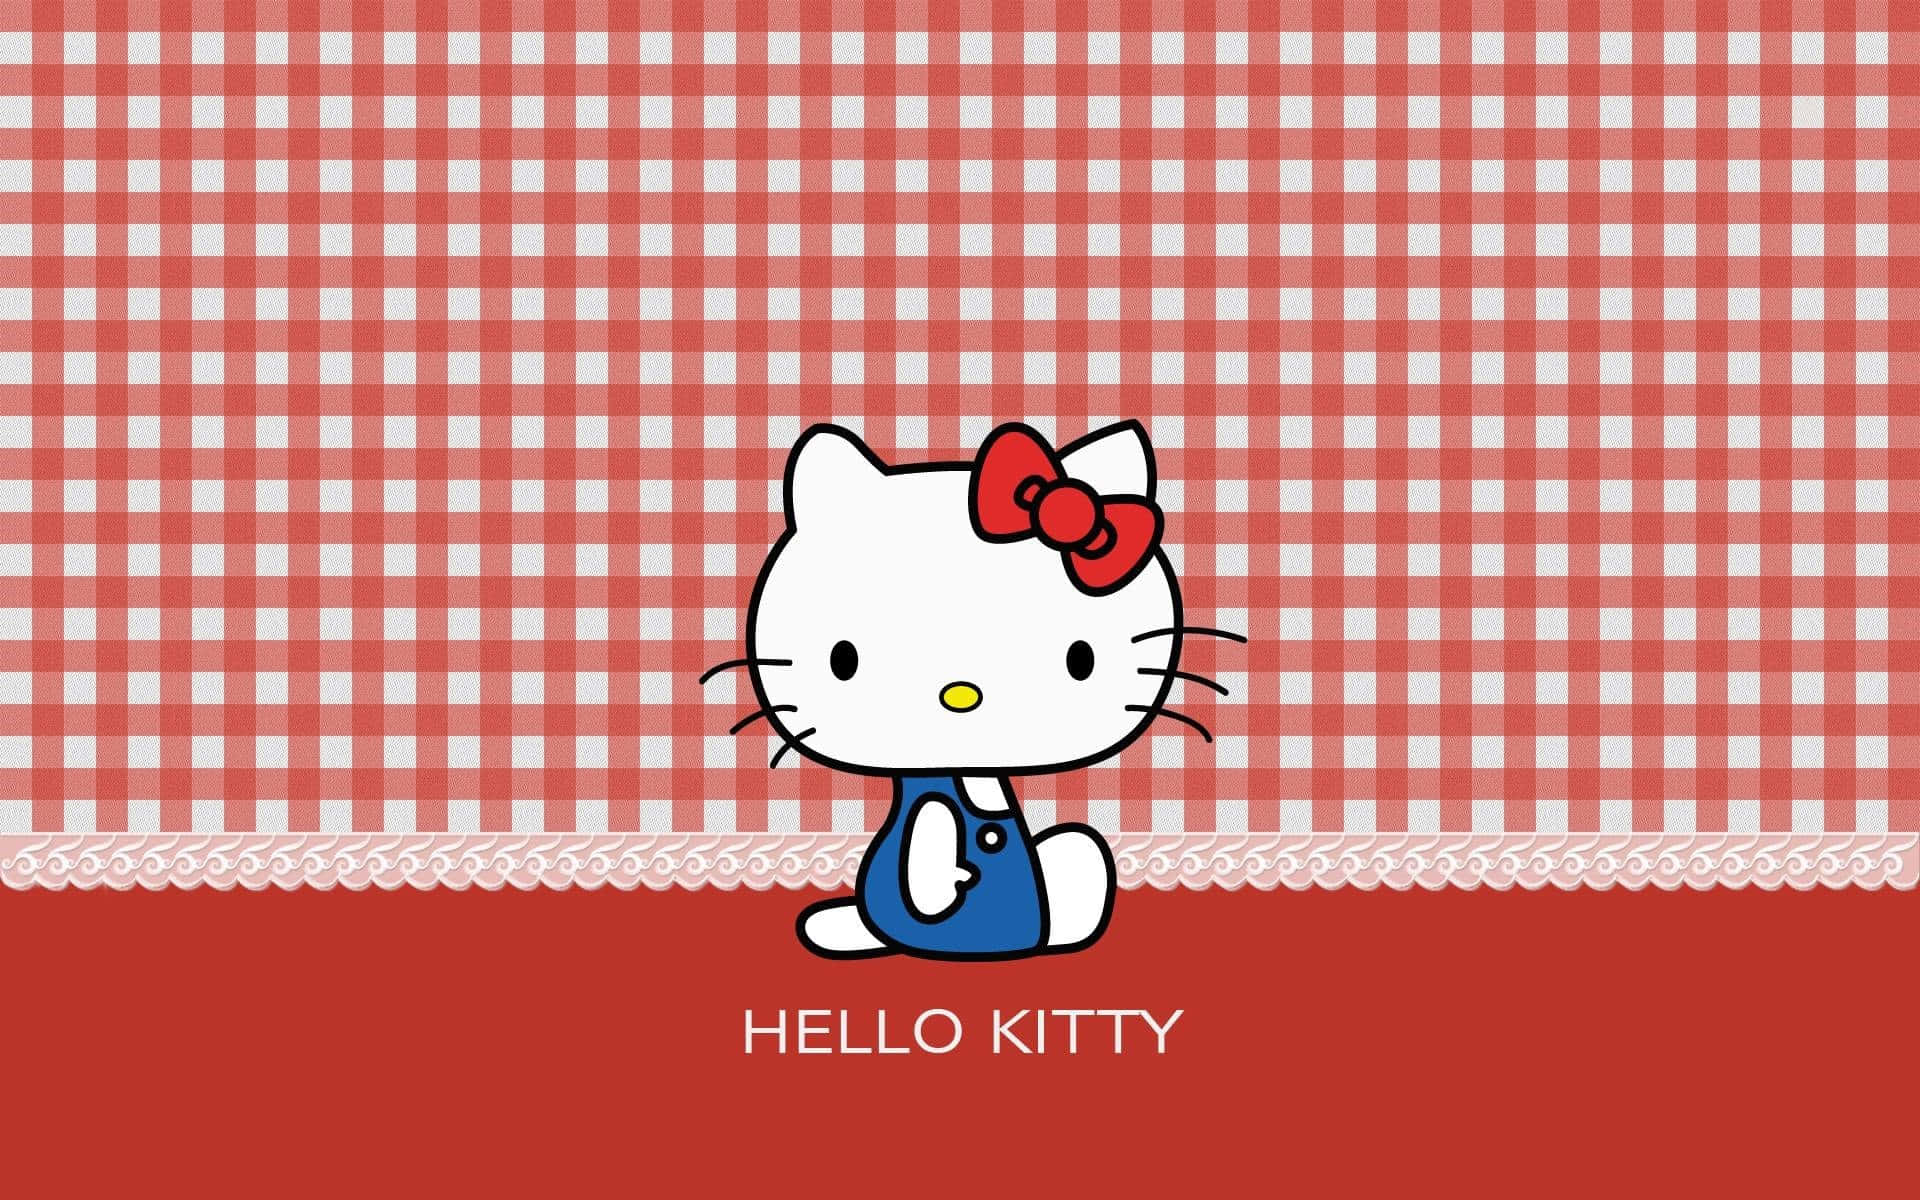 Classic Hello Kitty Red Gingham Background Wallpaper